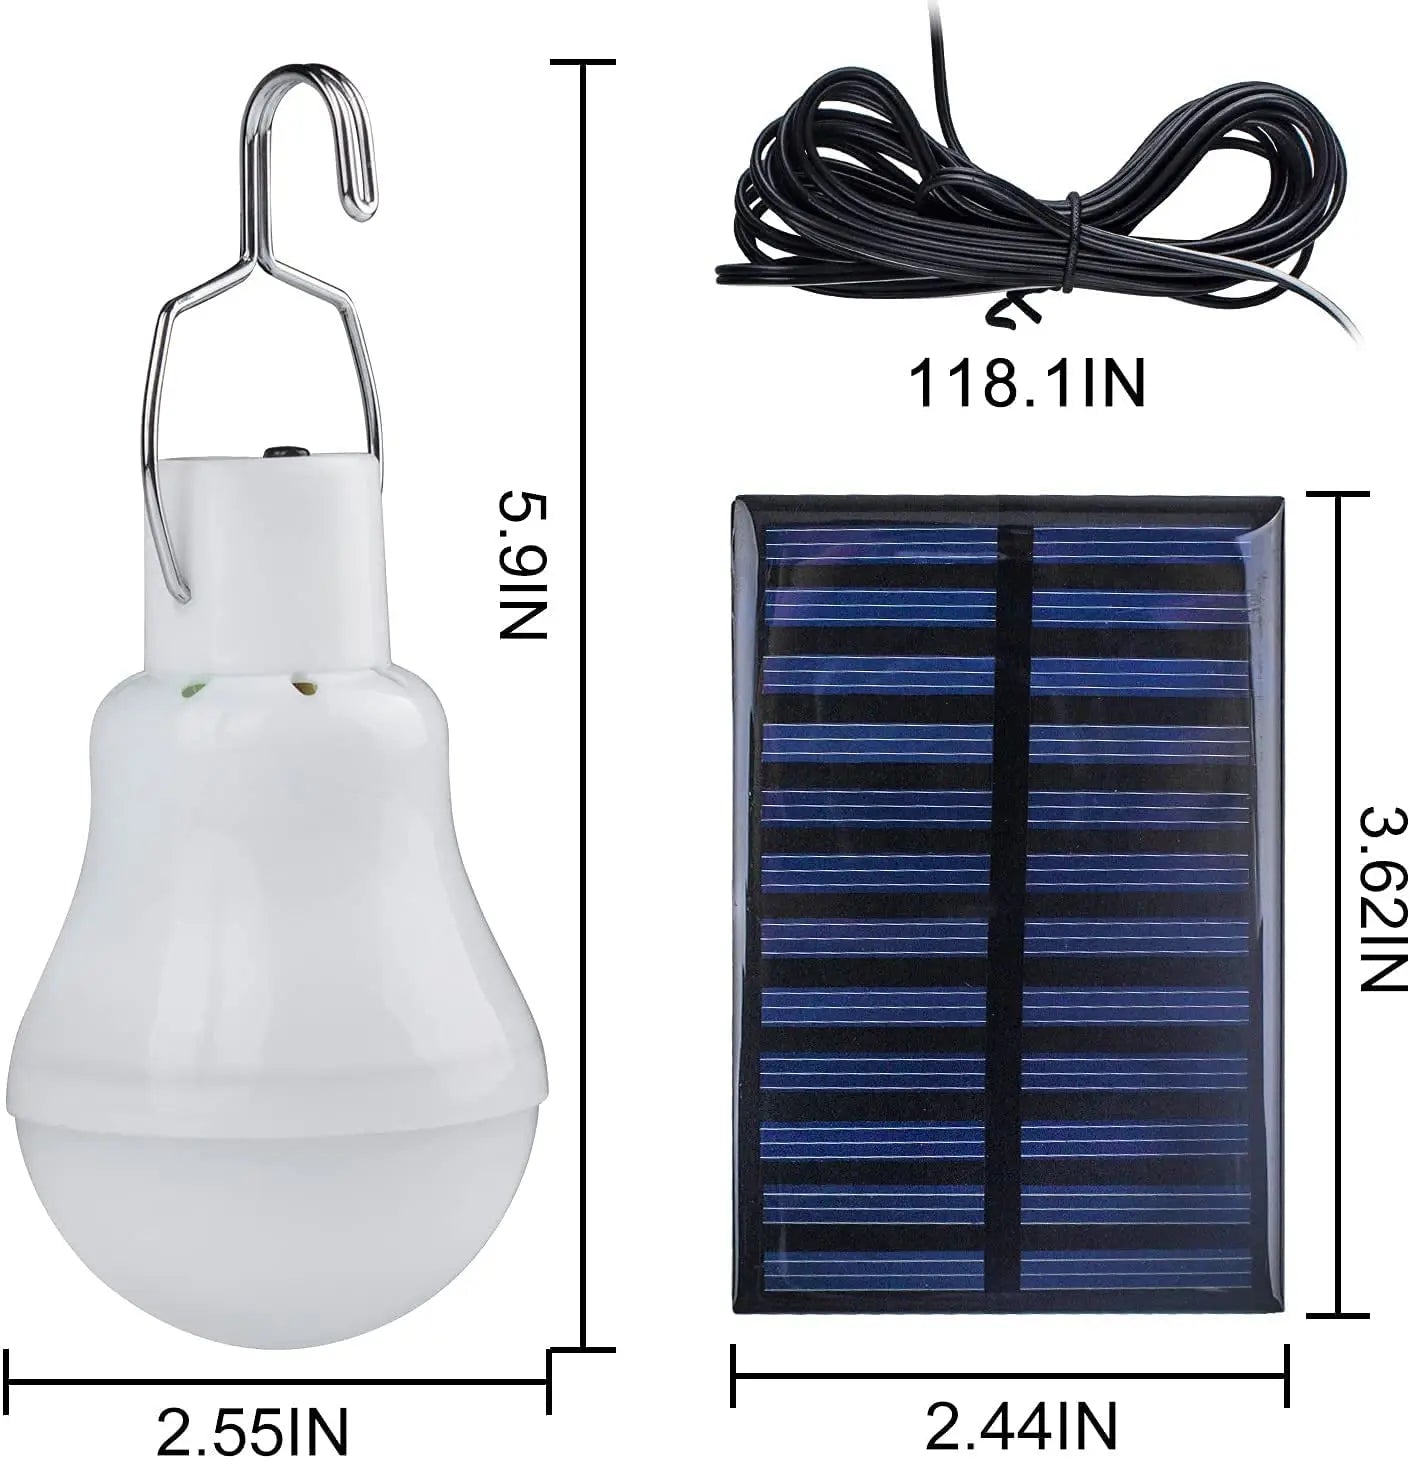 LED Solar Bulb Light, Initial charge requires 4-5 hours of direct sunlight for a full battery.